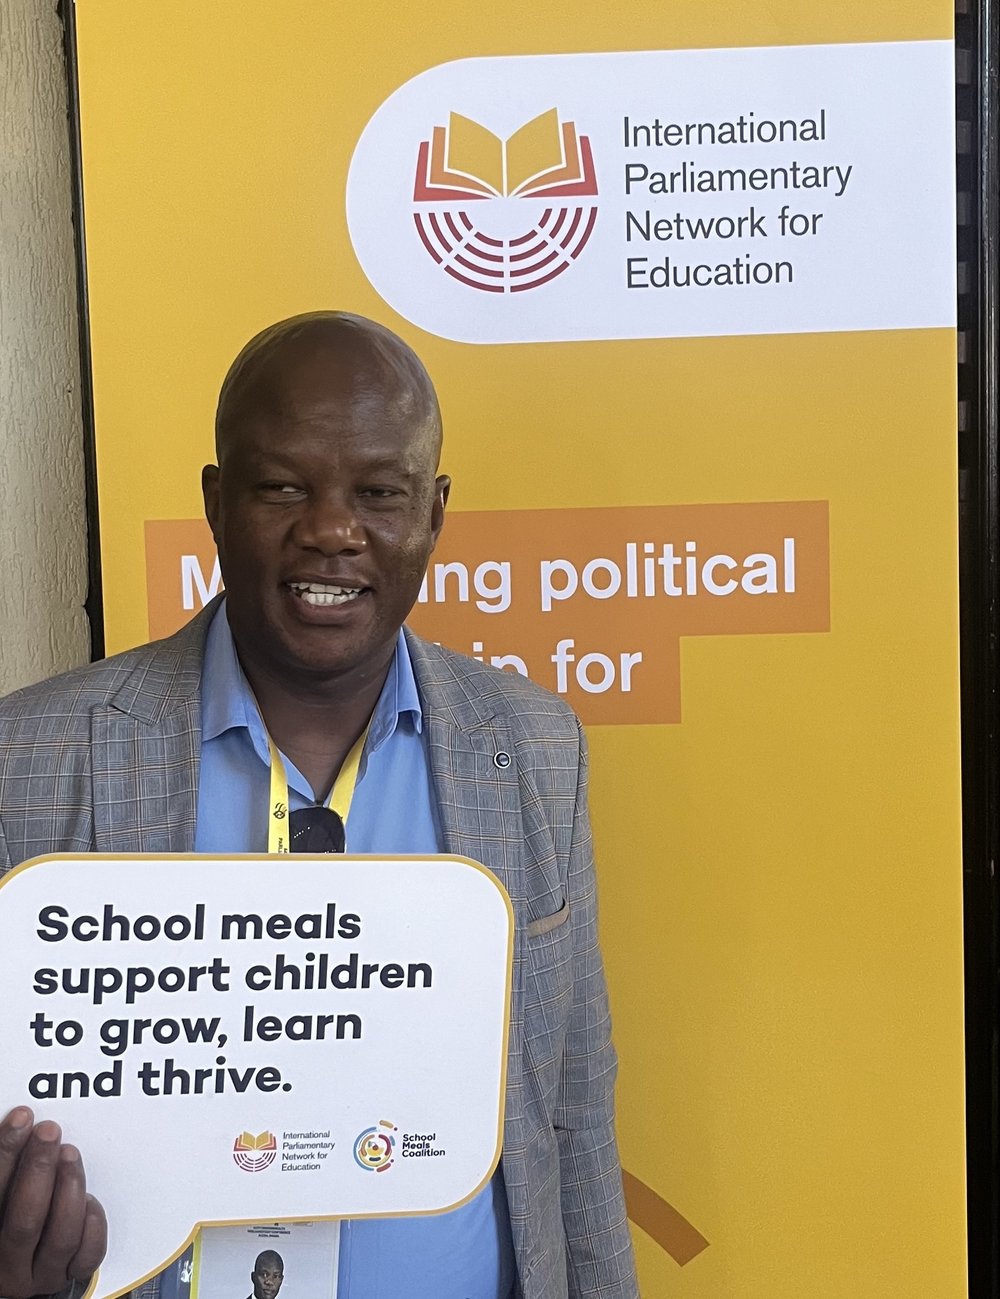  Hon. Aaron Motswana; Parliament of North West, South Africa 